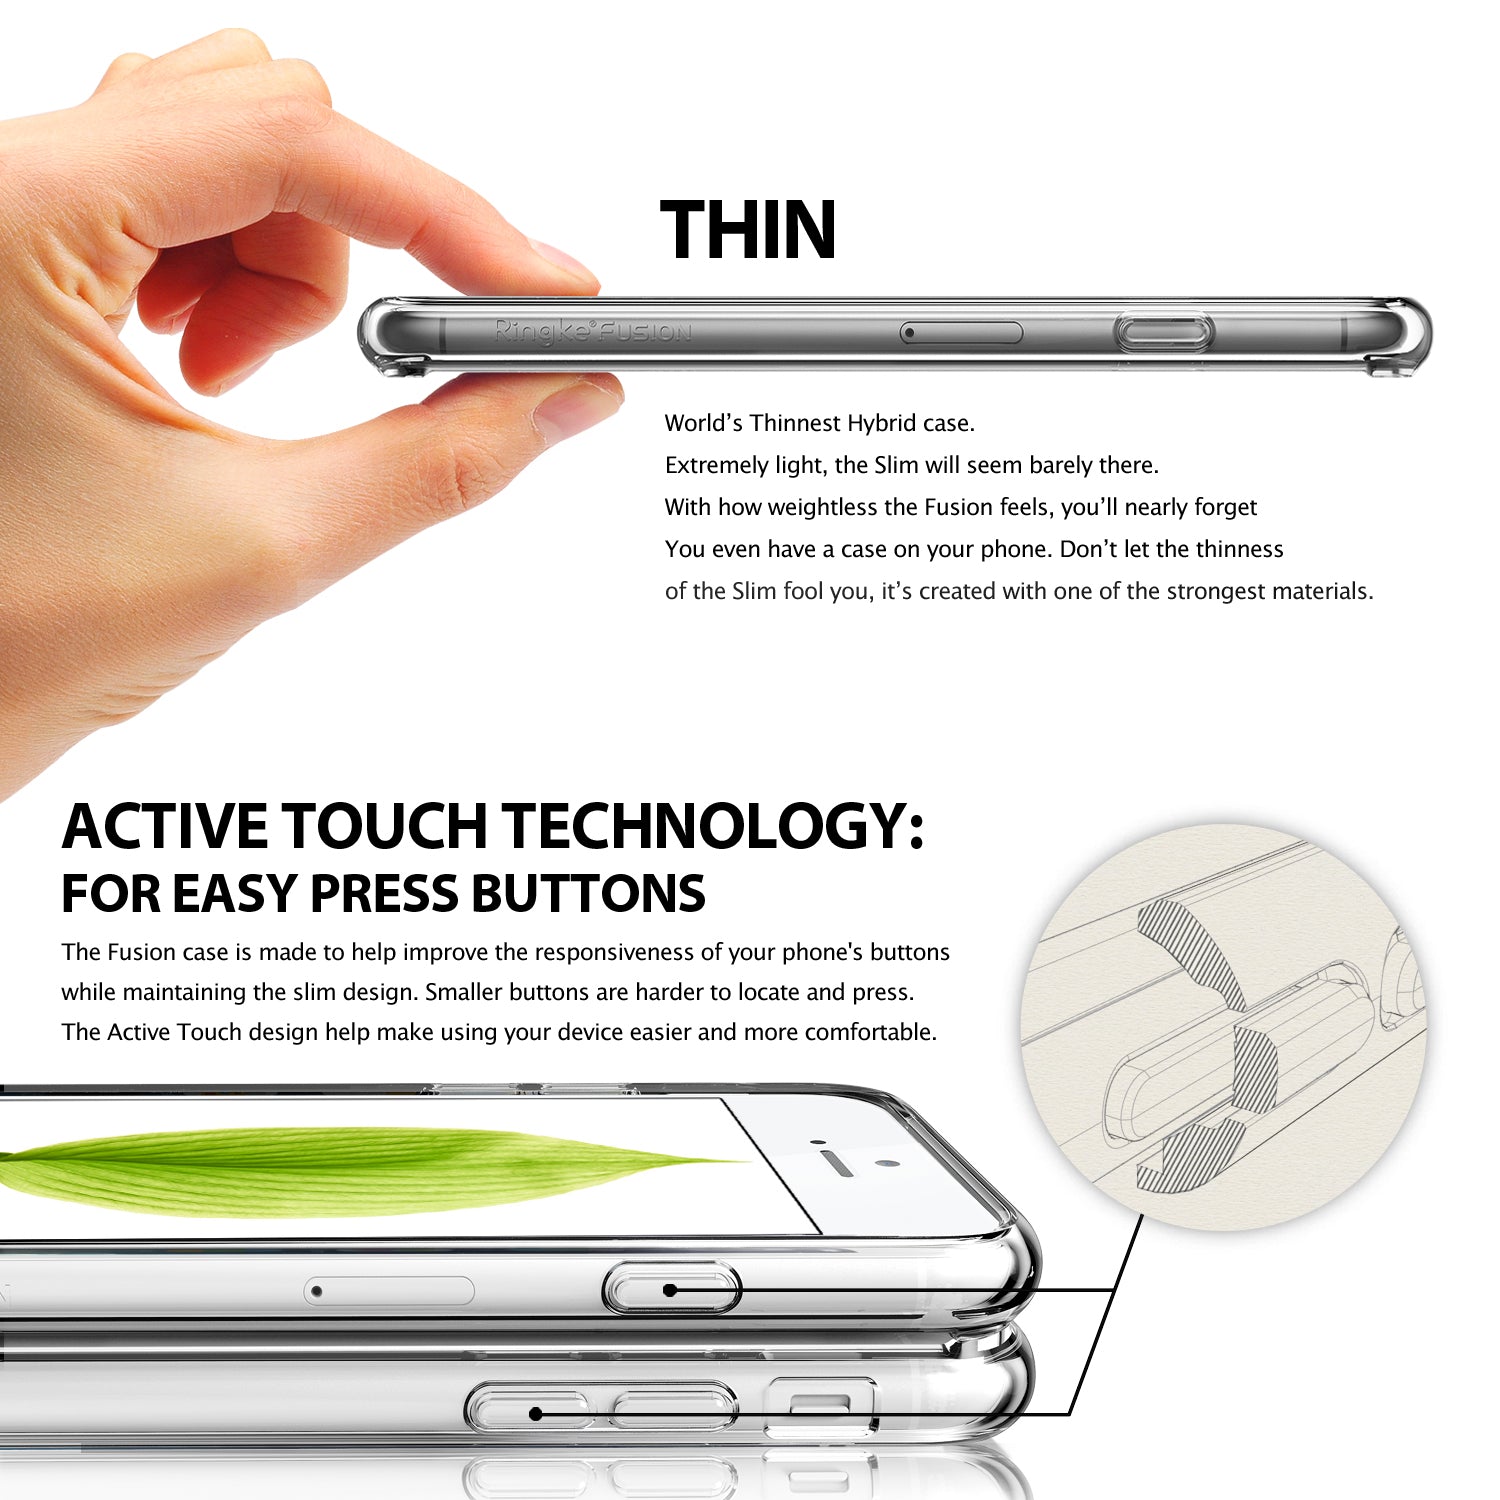 iPhone 6 Case | Fusion - Thin. Active touch technology. For easy press buttons.